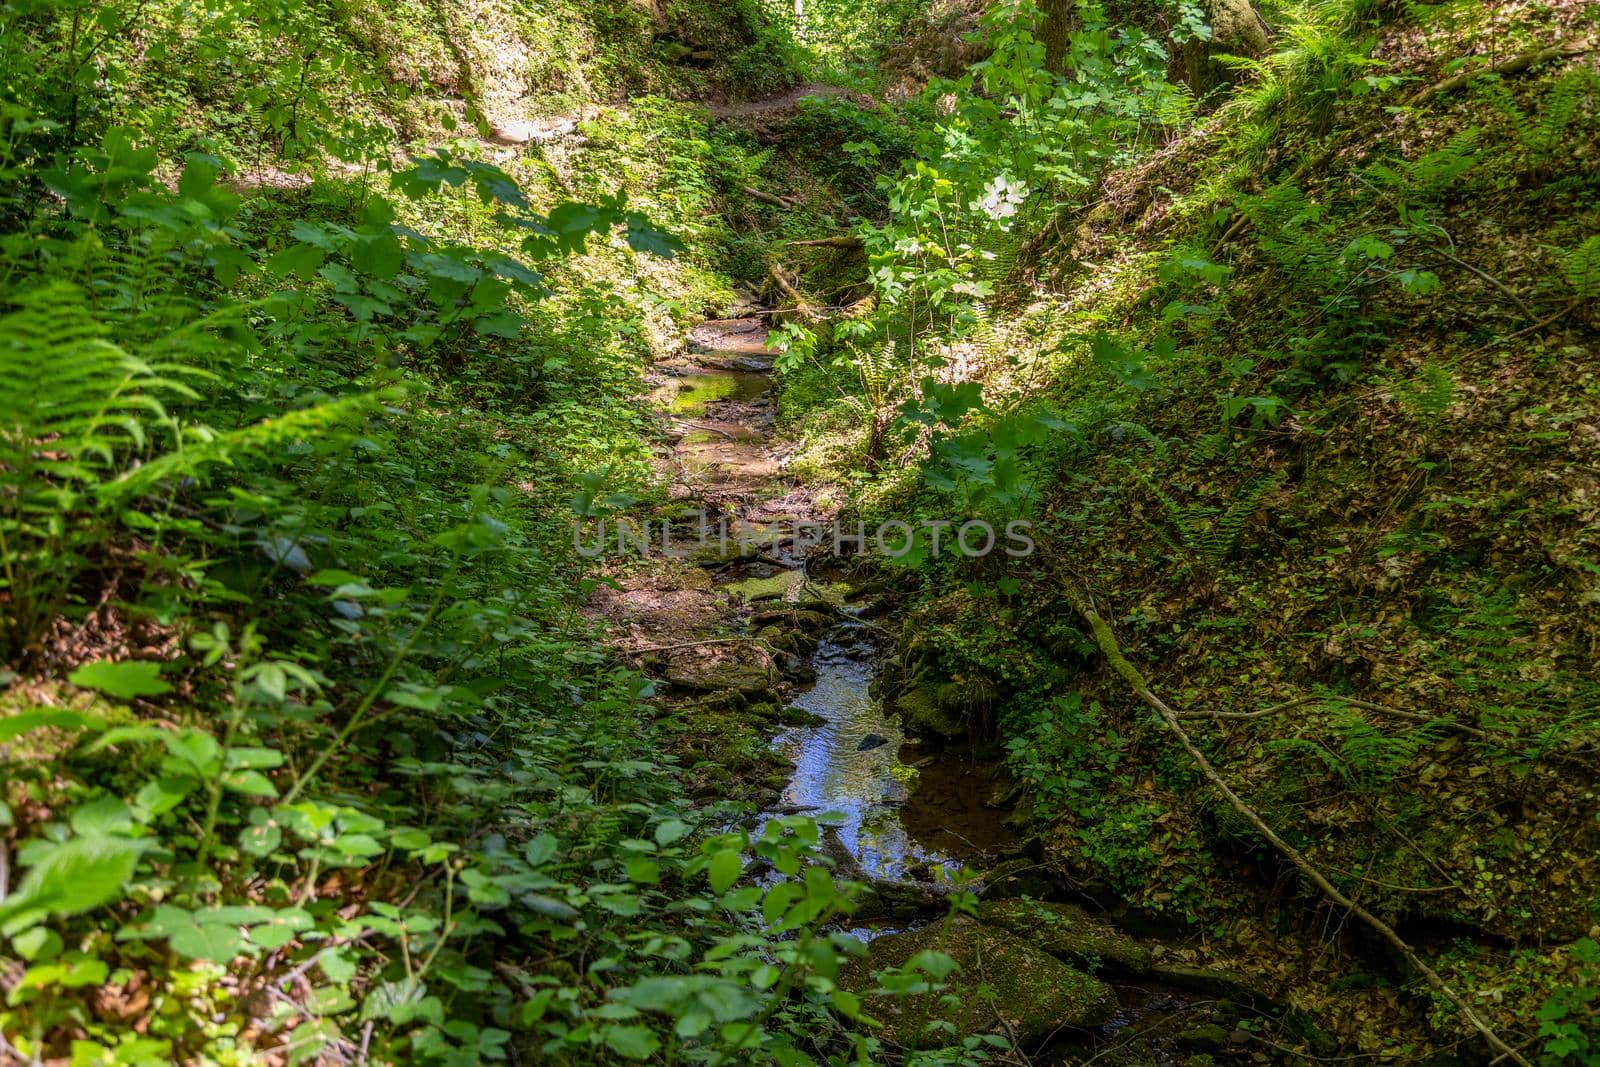 Small stream in the canyon Hexemklamm, Palatinate forest nearby Pirmasens  by reinerc